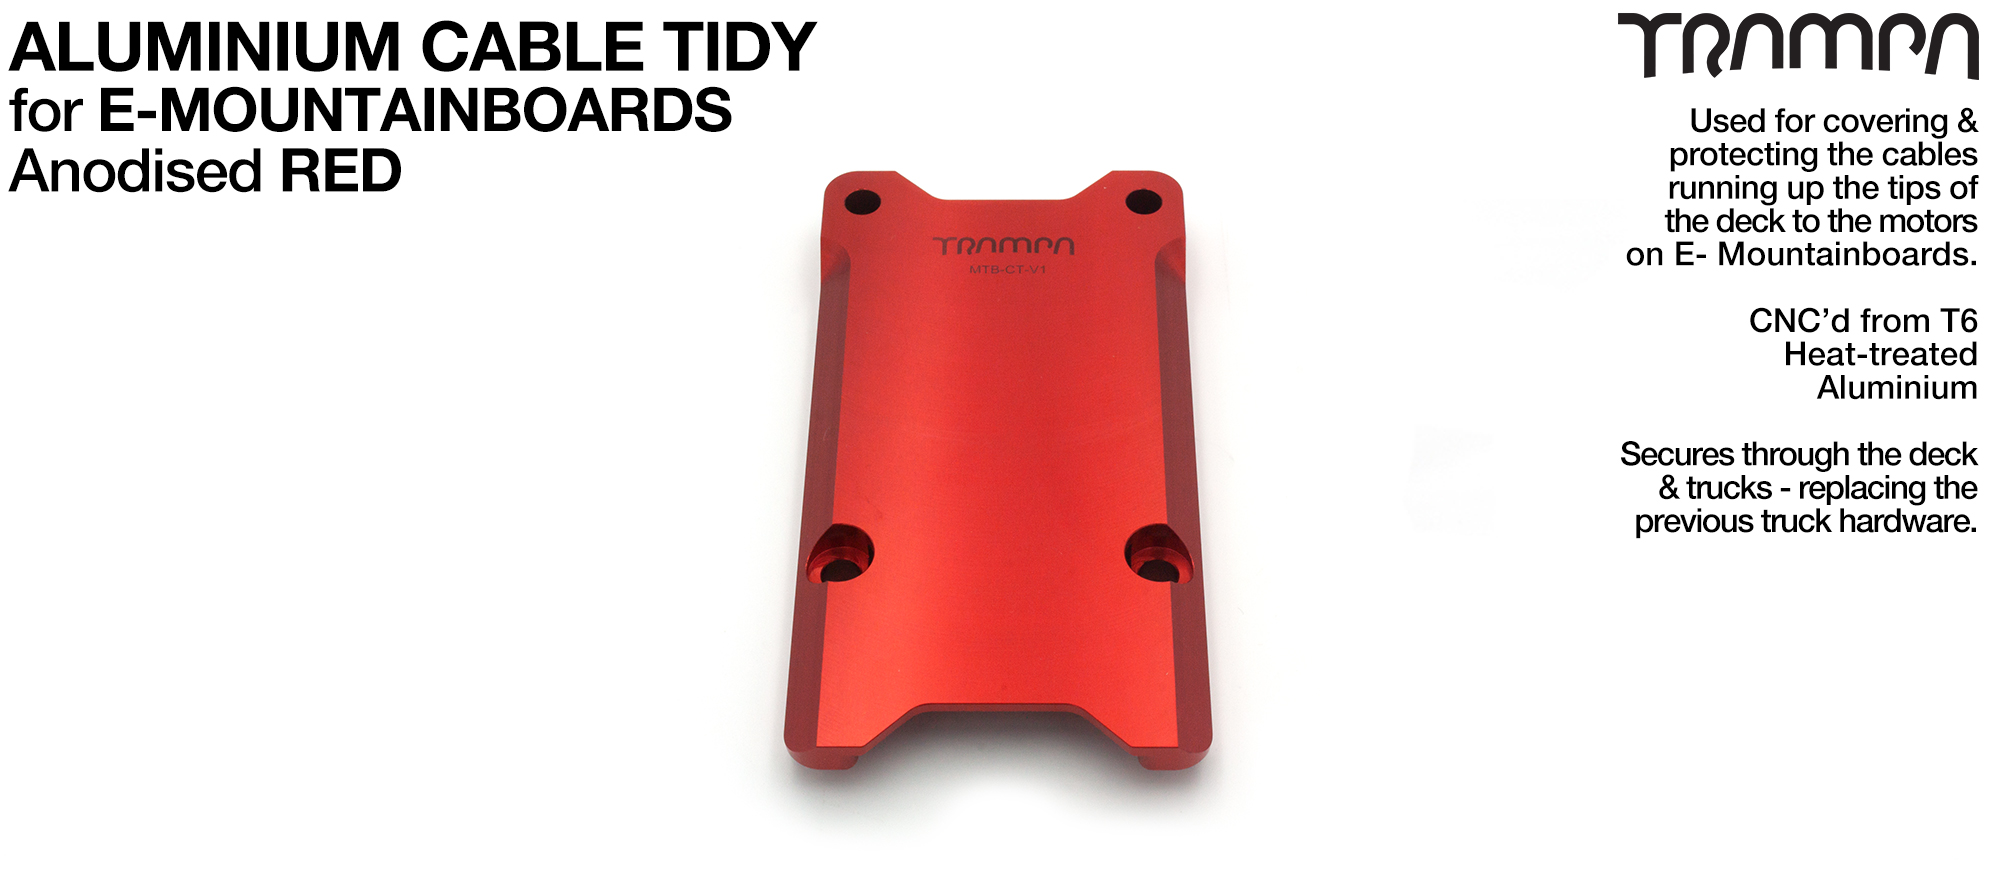 Anodised Aluminum Cable Tidy - RED V1